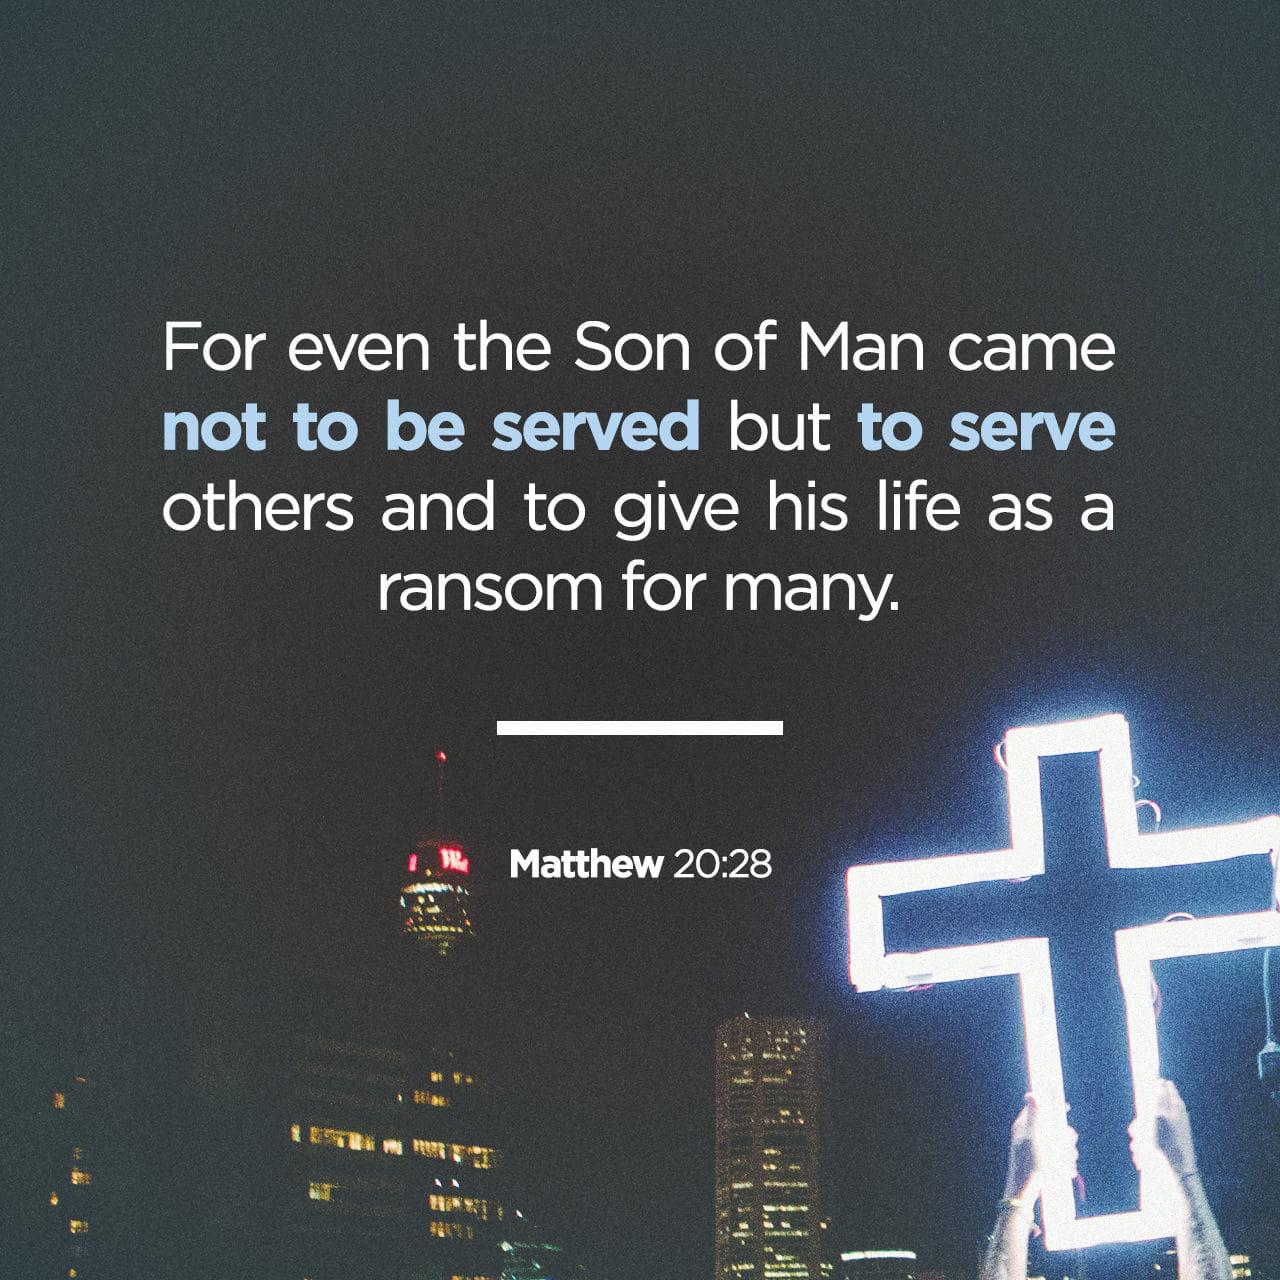 Bible Verse of the Day - day 154 - image 508 (Matthew 20:17-28)